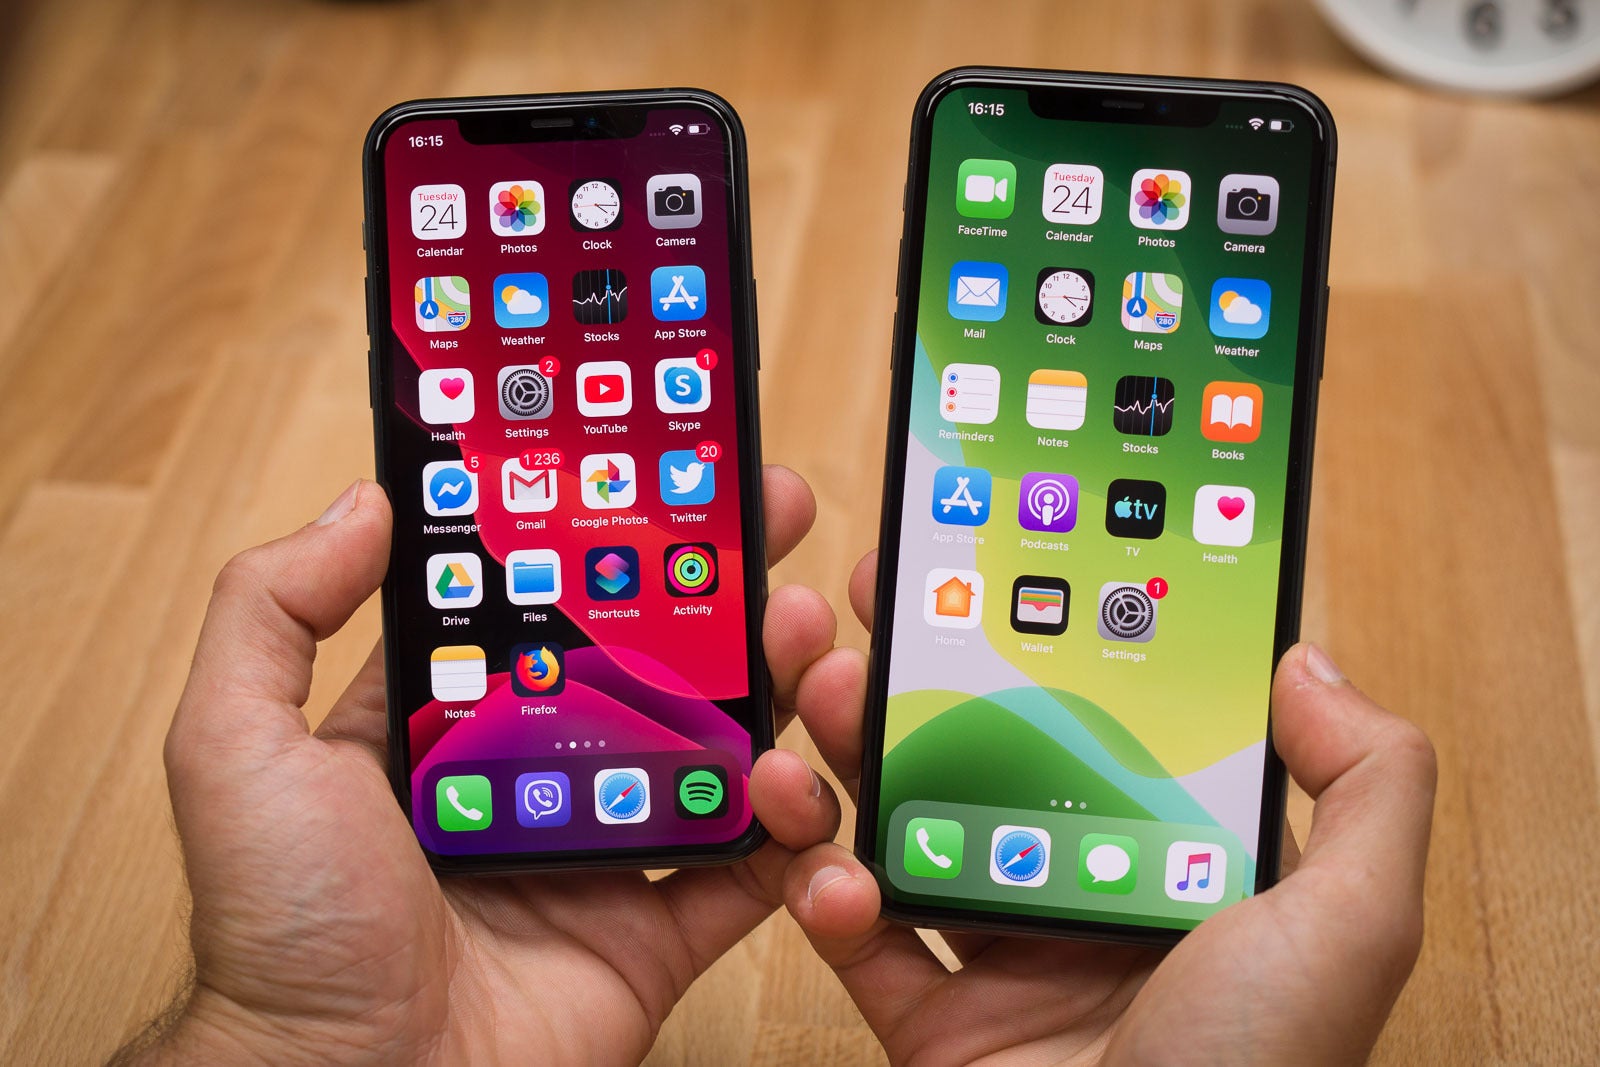 The iPhone 11 Pro and iPhone 11 Pro Max - New iOS 13 update fixes major issue that affected iPhone users for months